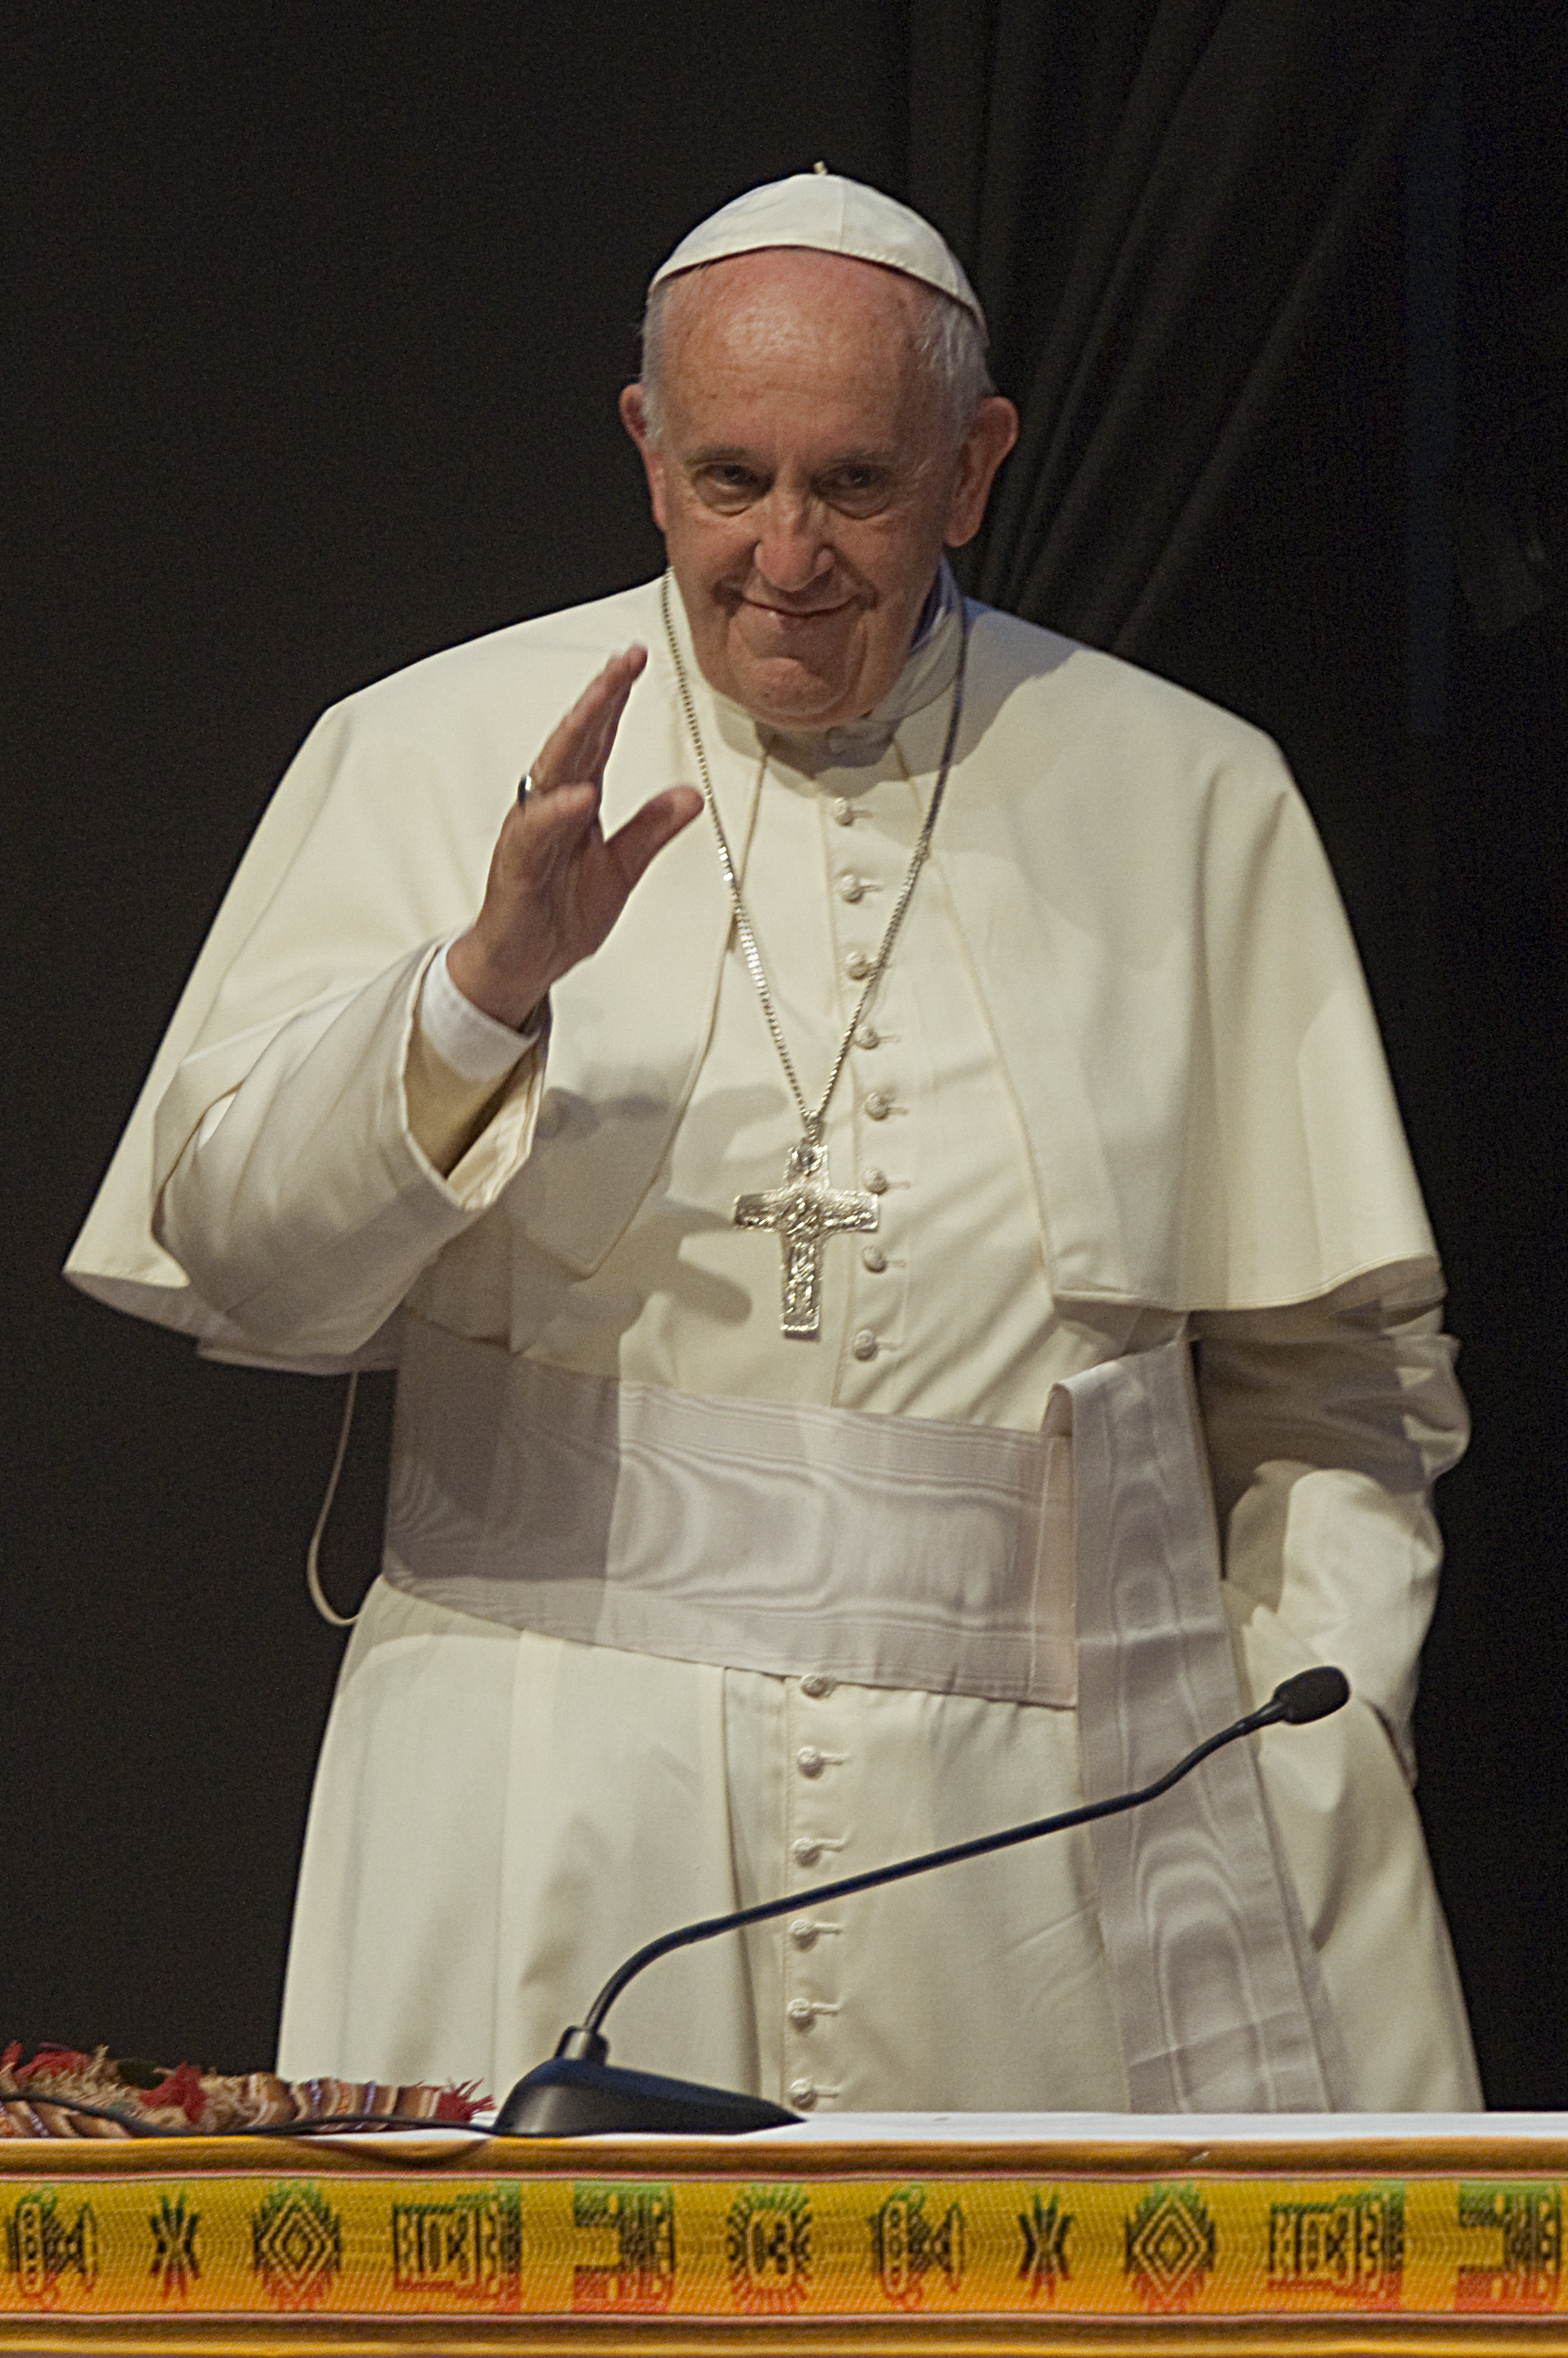 Pope Francis greets the attendees of a conference as part of the II Meeting of People's Movements in Santa Cruz, Bolivia, on on July 9, 2015.